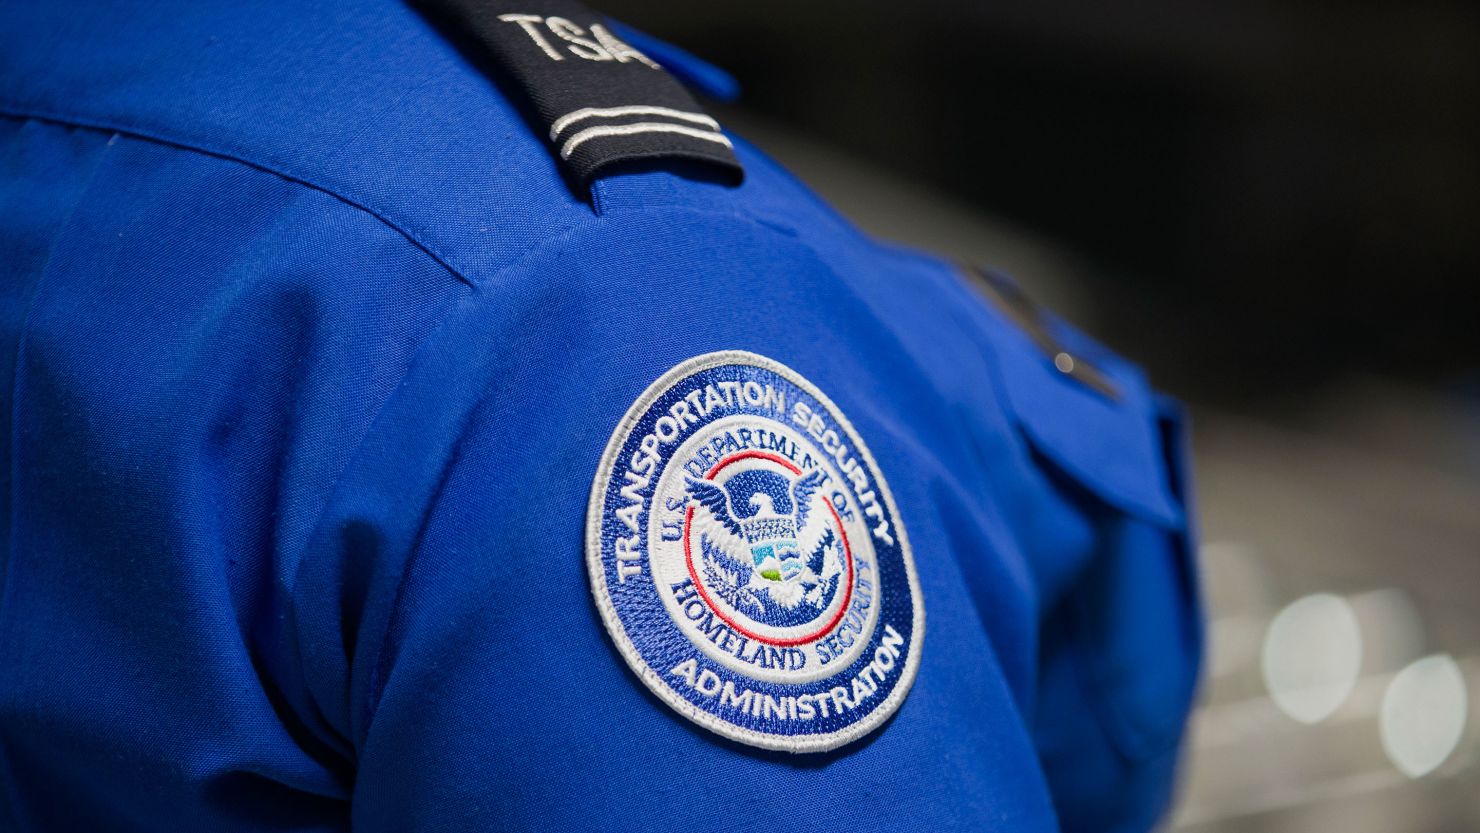 The lawsuit claims a female TSA officer groped the woman under her clothing during a security pat-down.